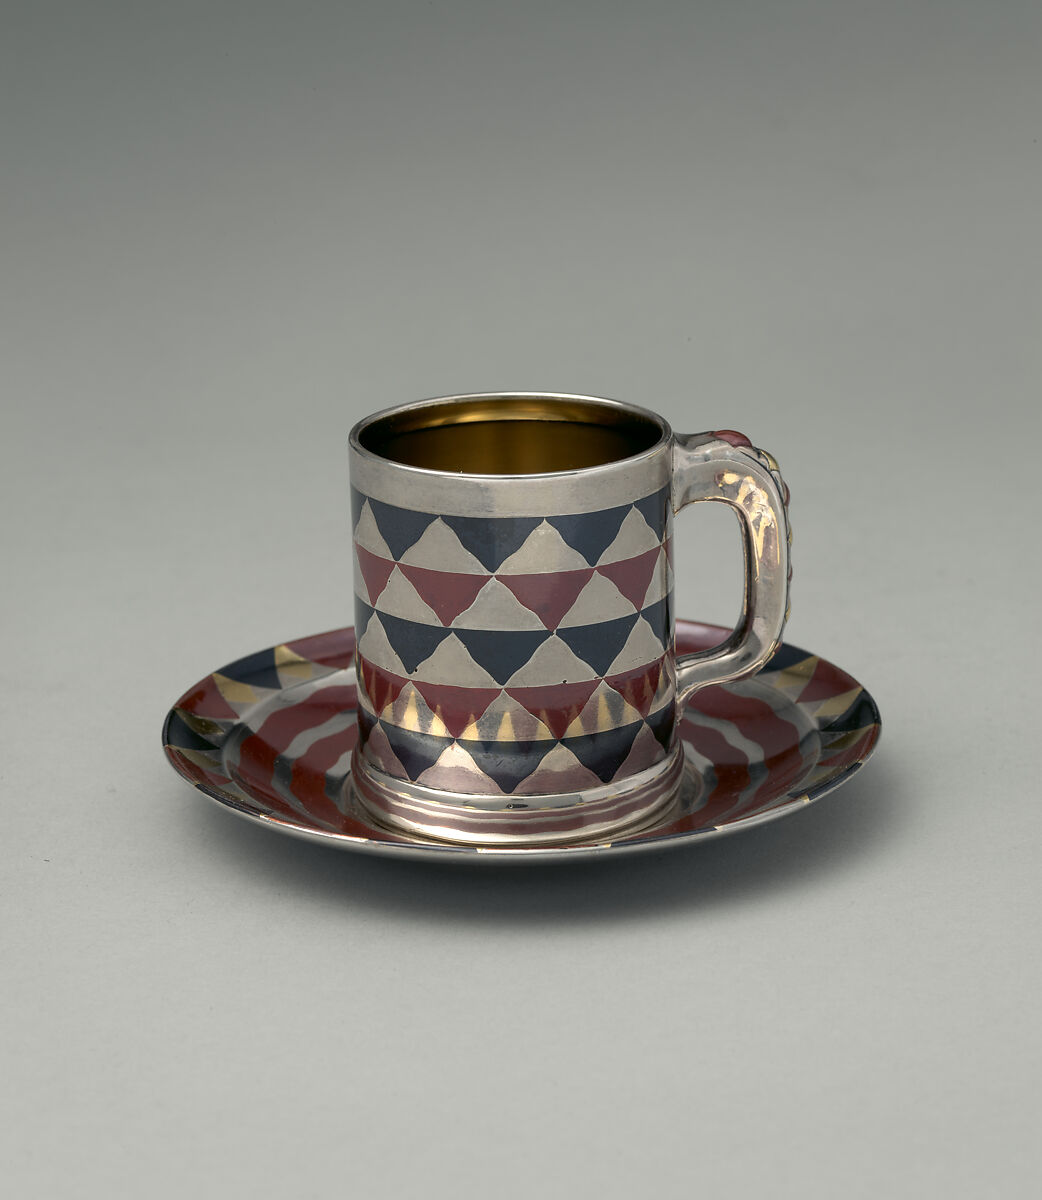 Cup and saucer, Tiffany &amp; Co. (1837–present), Silver, patinated copper,  patinated copper-platinum-iron alloy, and gold, American 